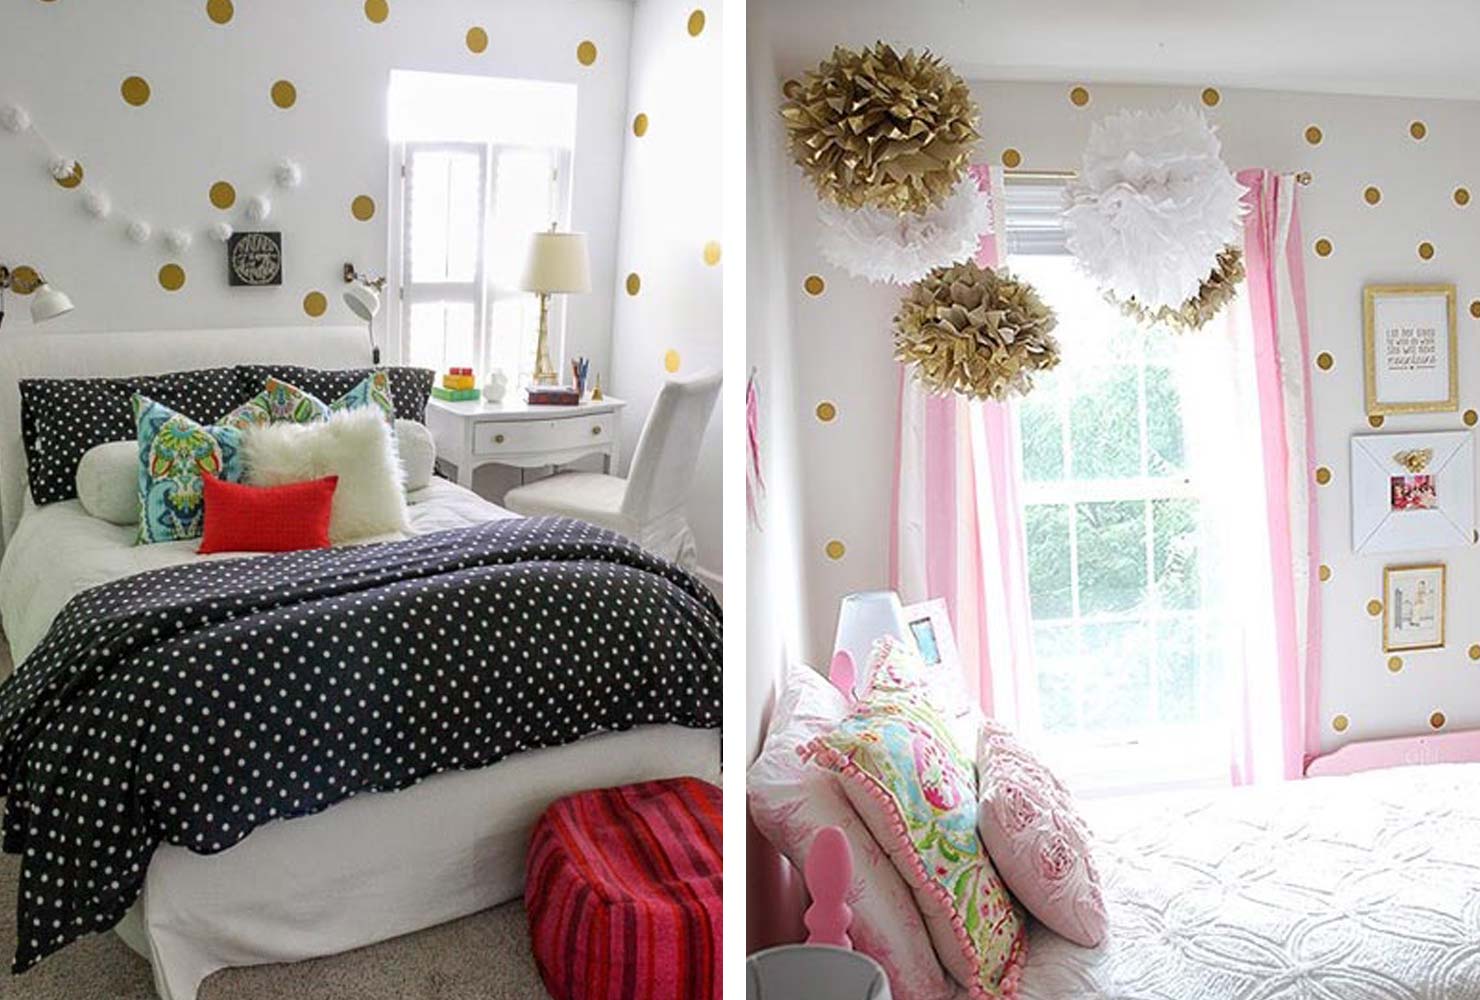 Gold Polka Dots On Girls Bedroom Wall - Lavender And Light Pink Rooms - HD Wallpaper 